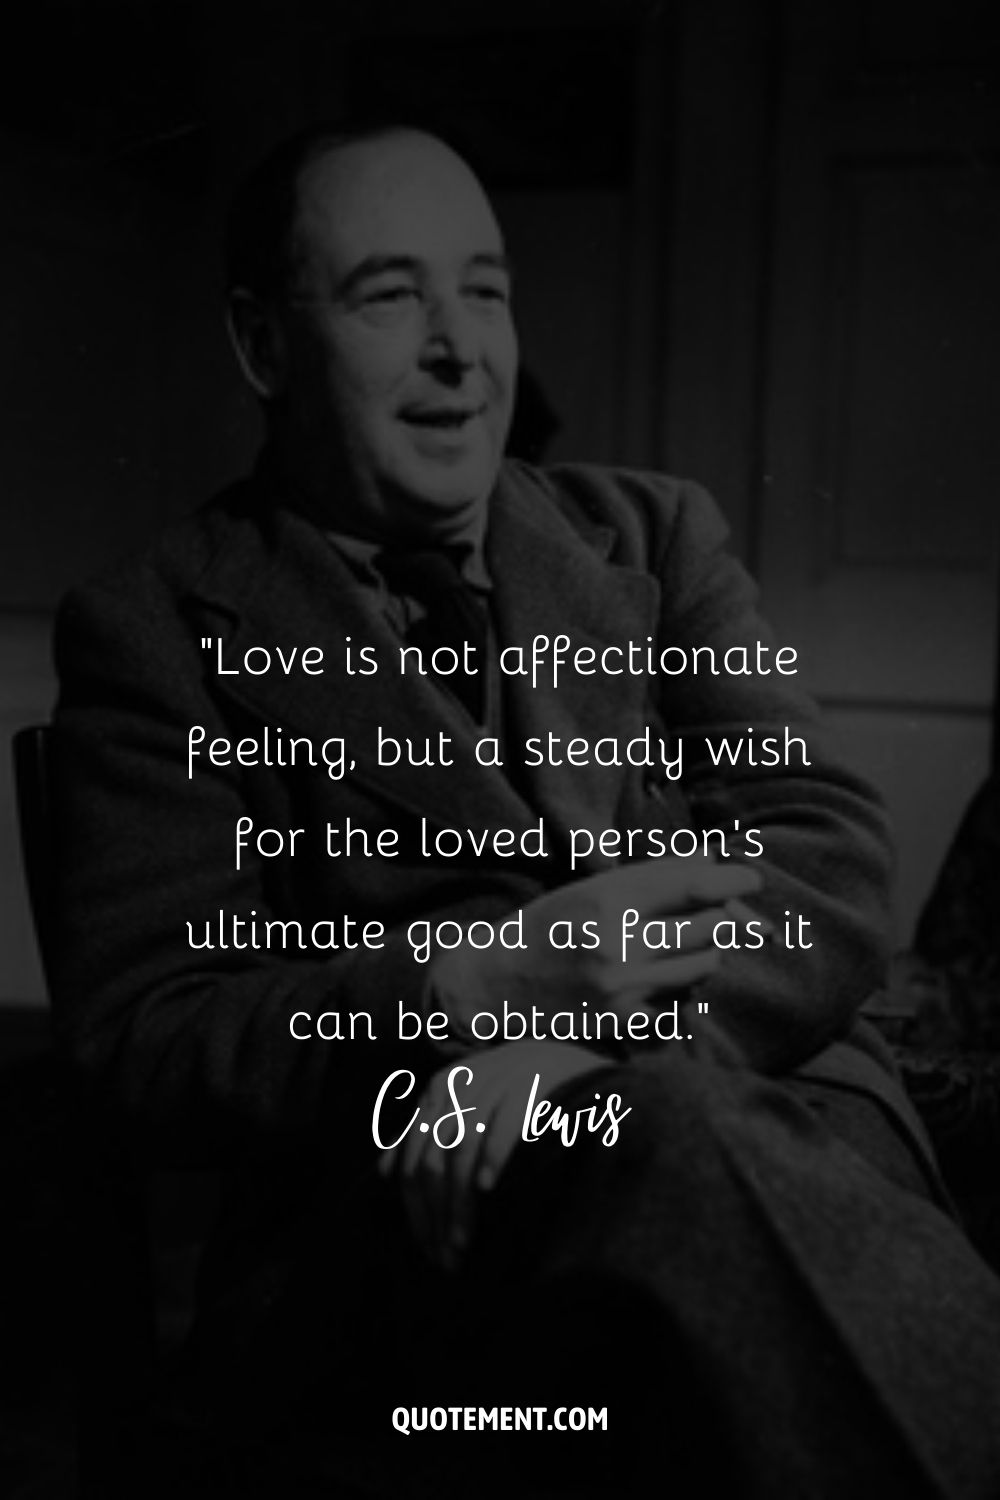 C.S. Lewis sitting in a chair